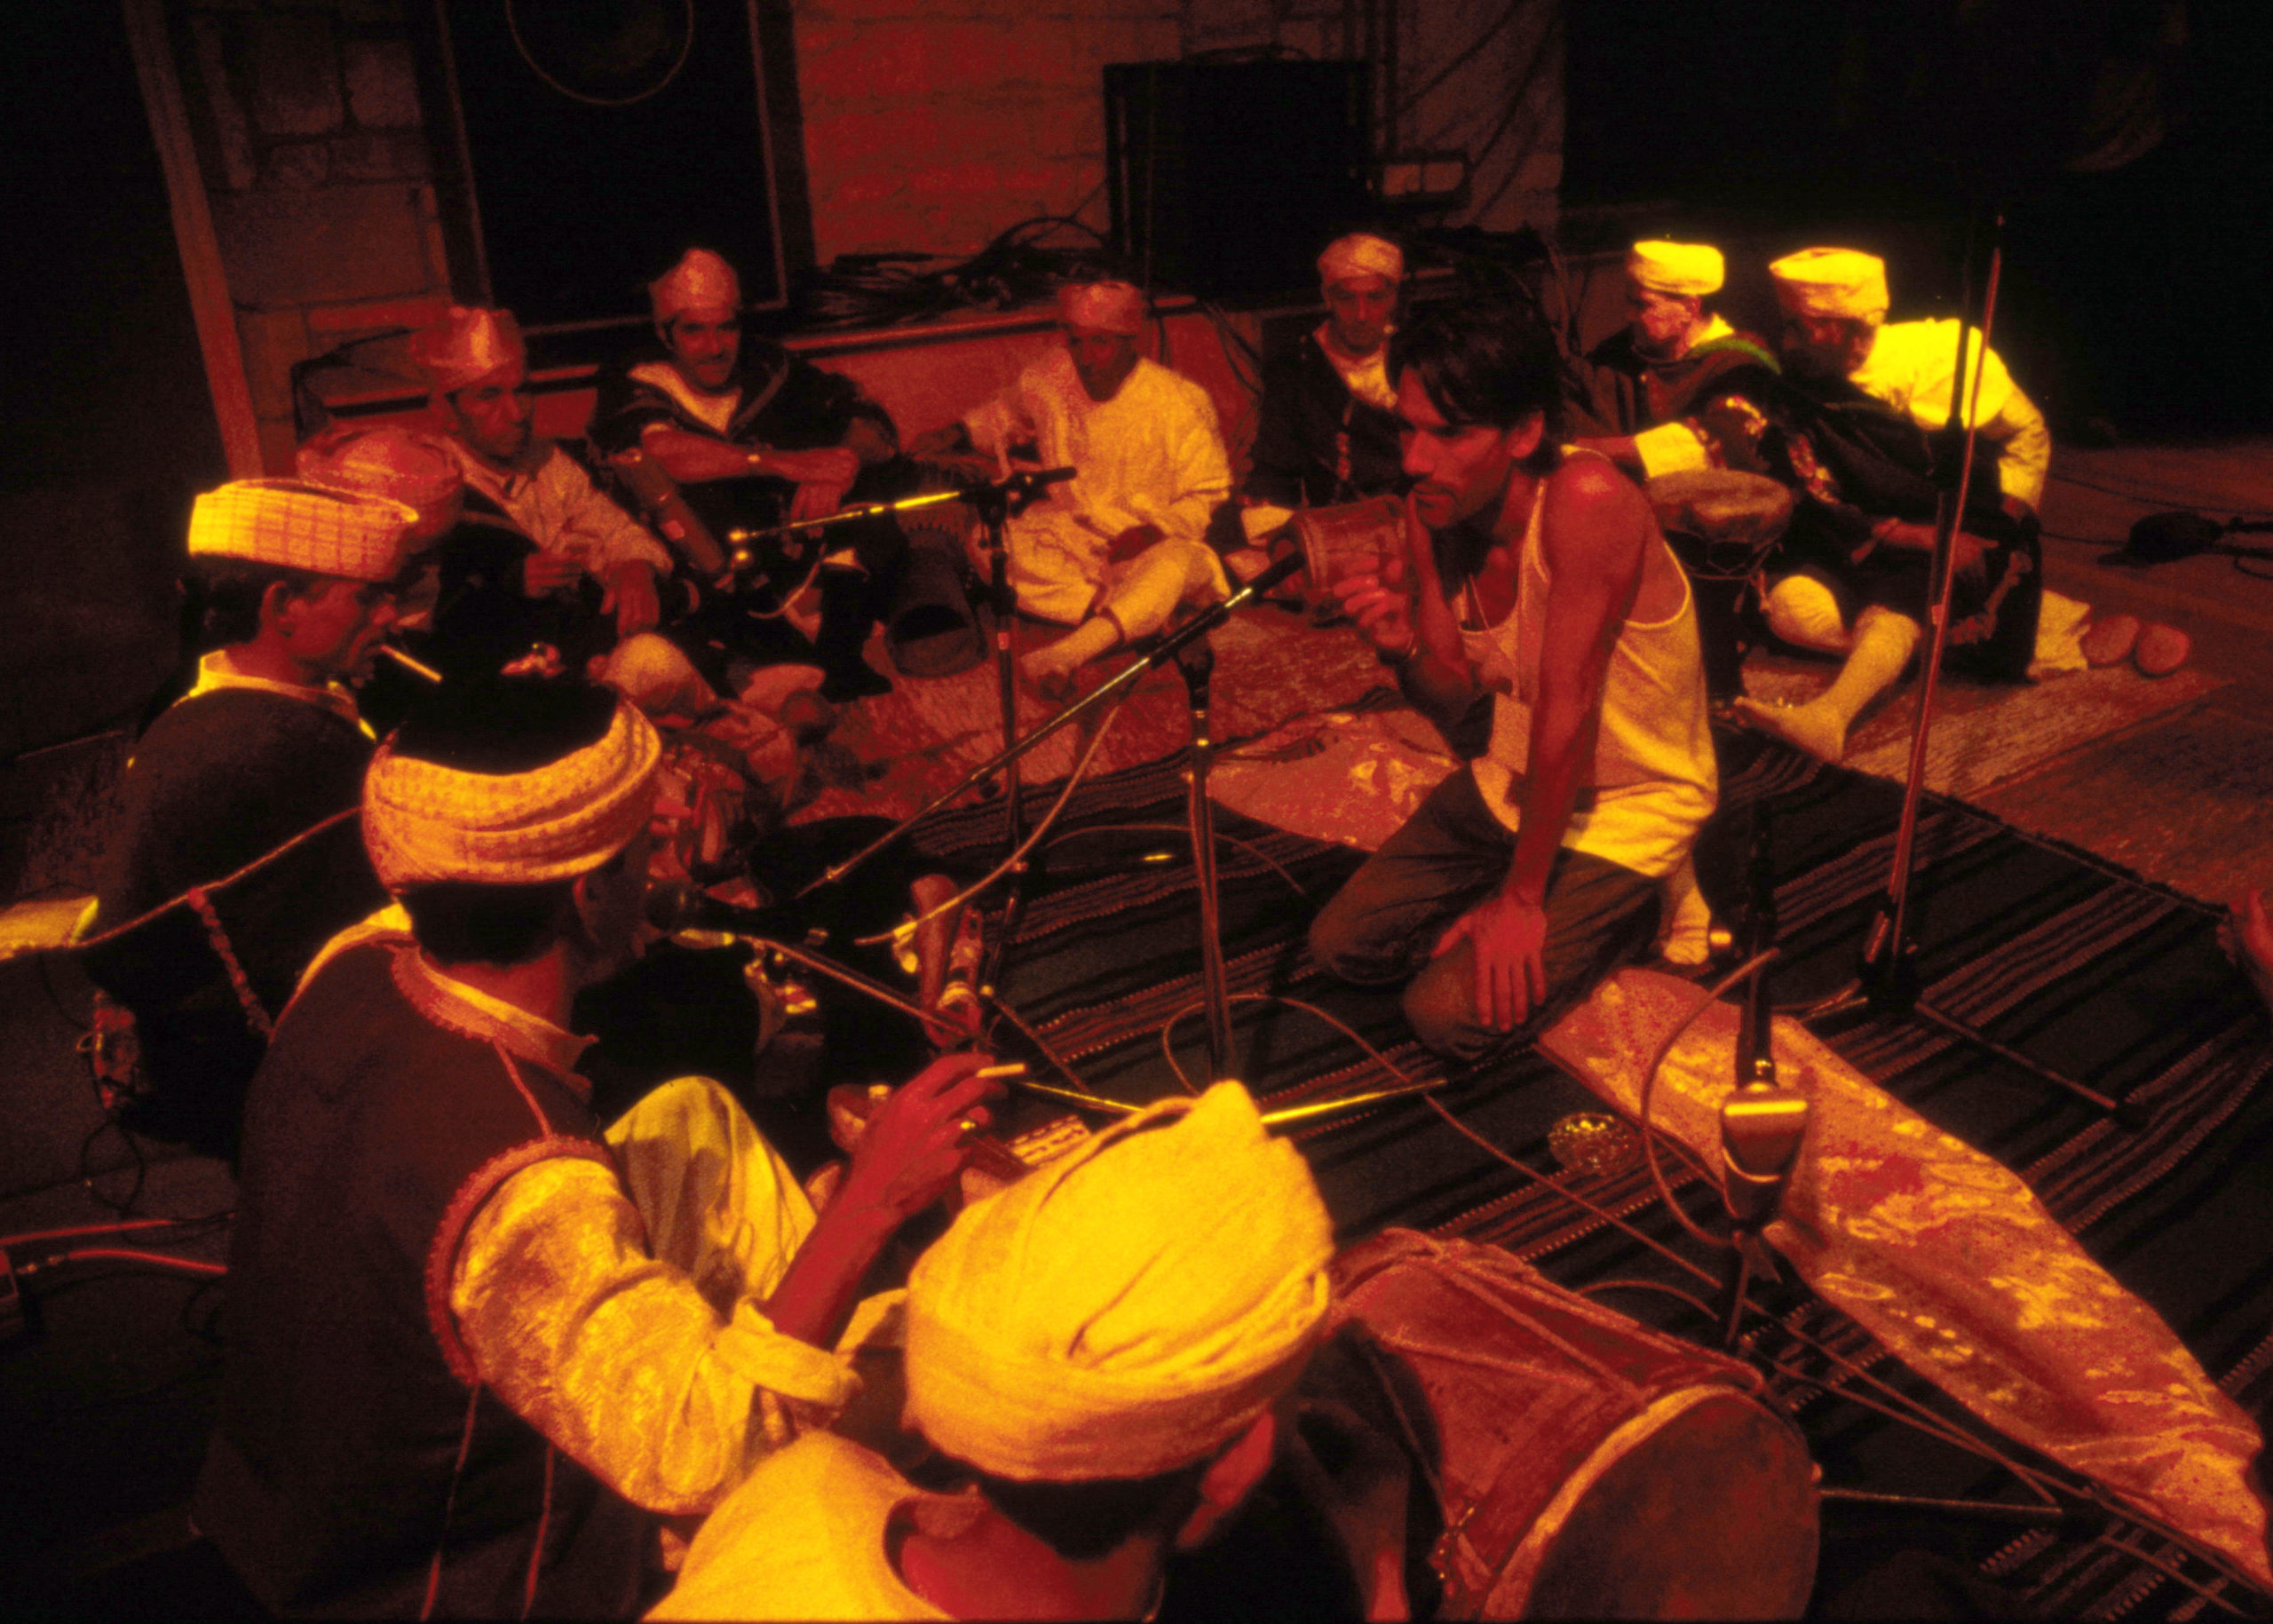 Tchad Blake with The Master Musicians of Jajouka led by Bachir Attar at Real World Studios, 1995.